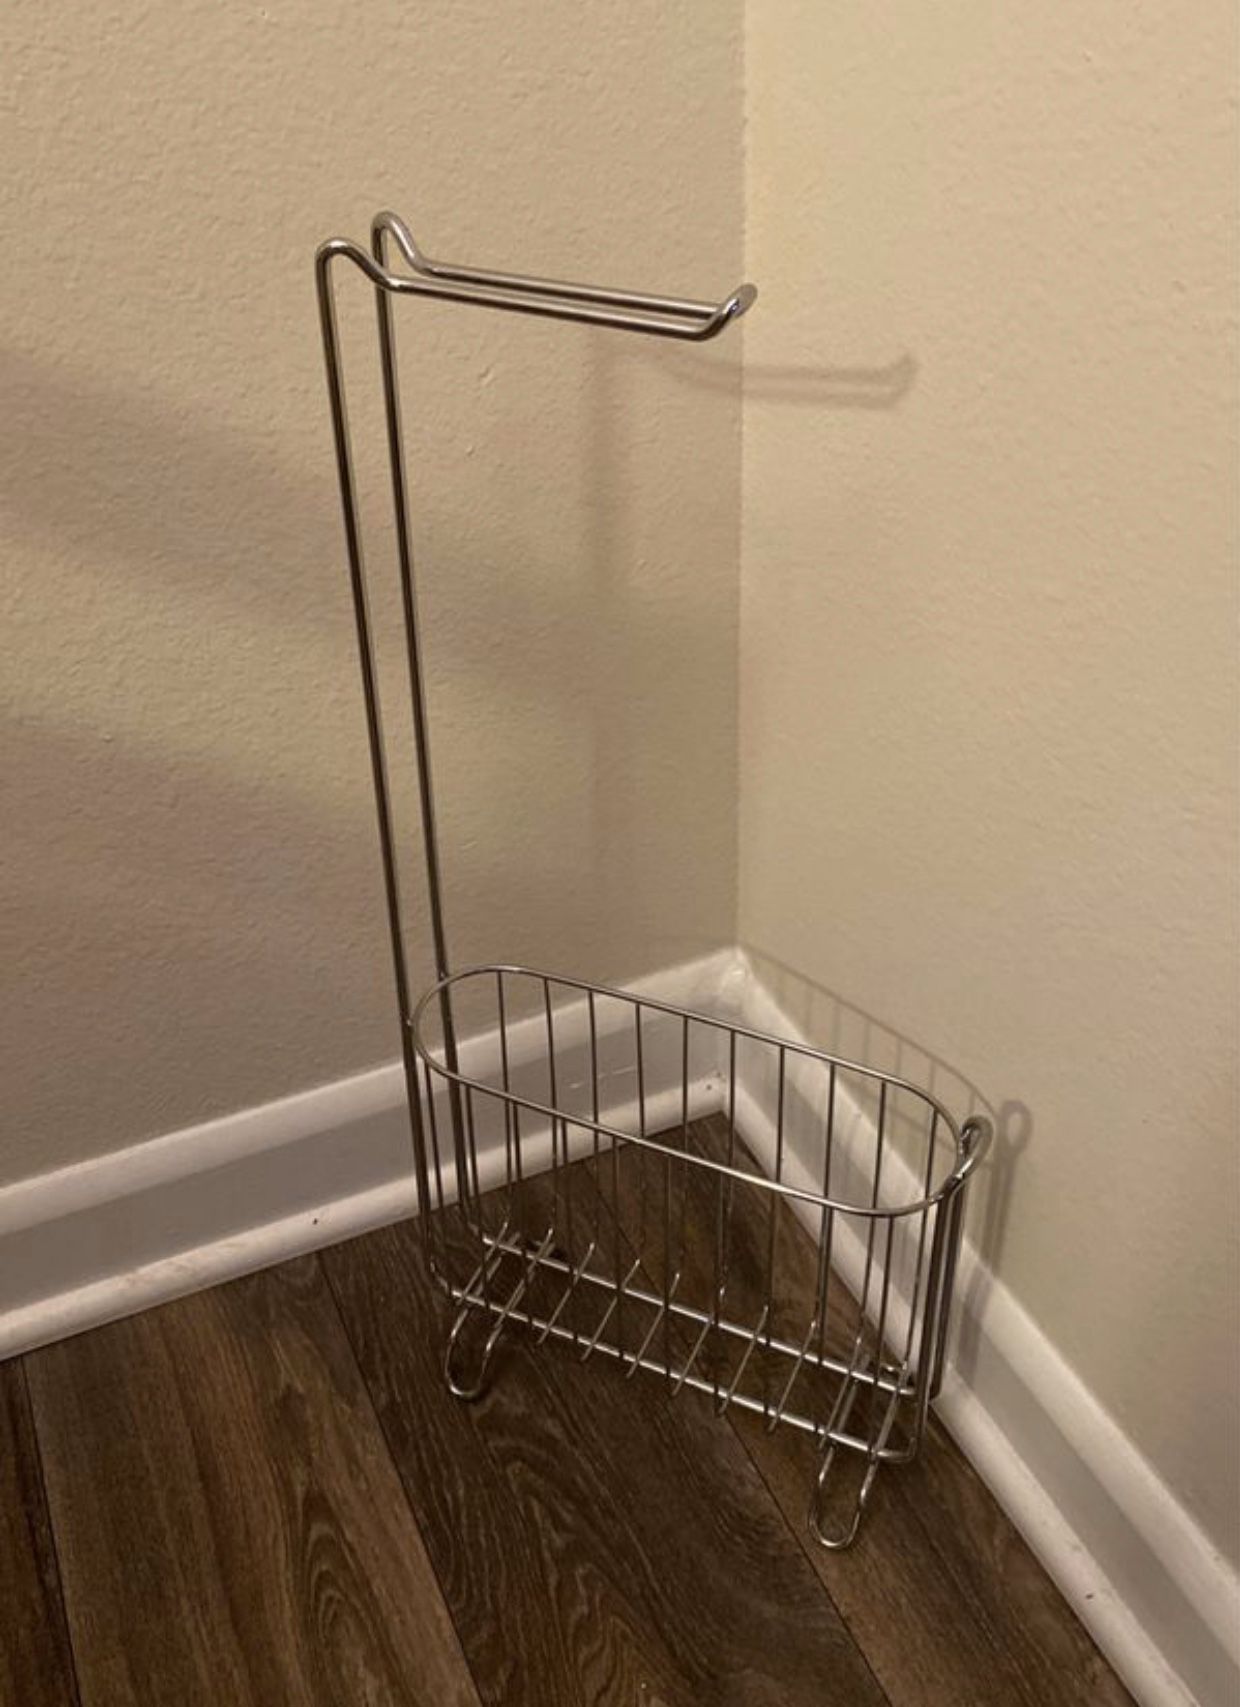 Metal toilet paper rack with magazine basket attached